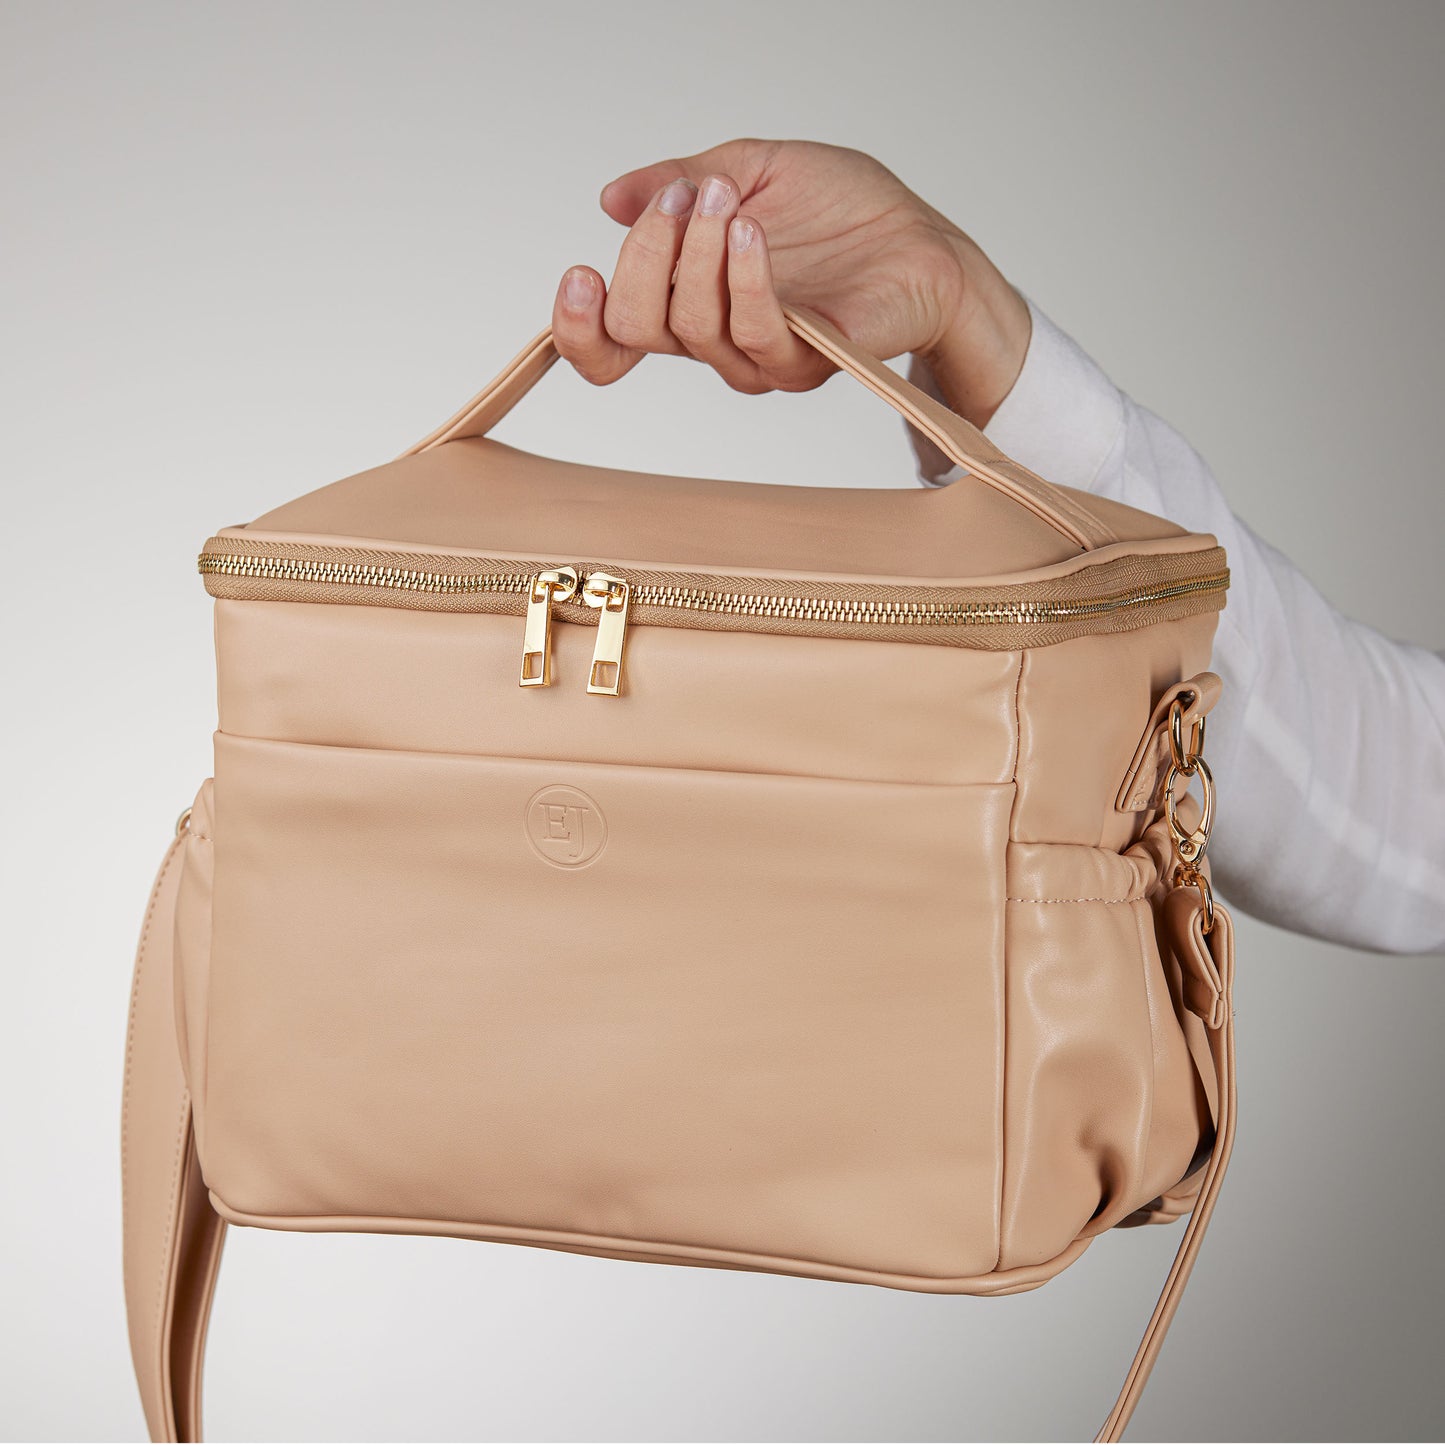 leather lunch bag in caramel beige being held up by a model